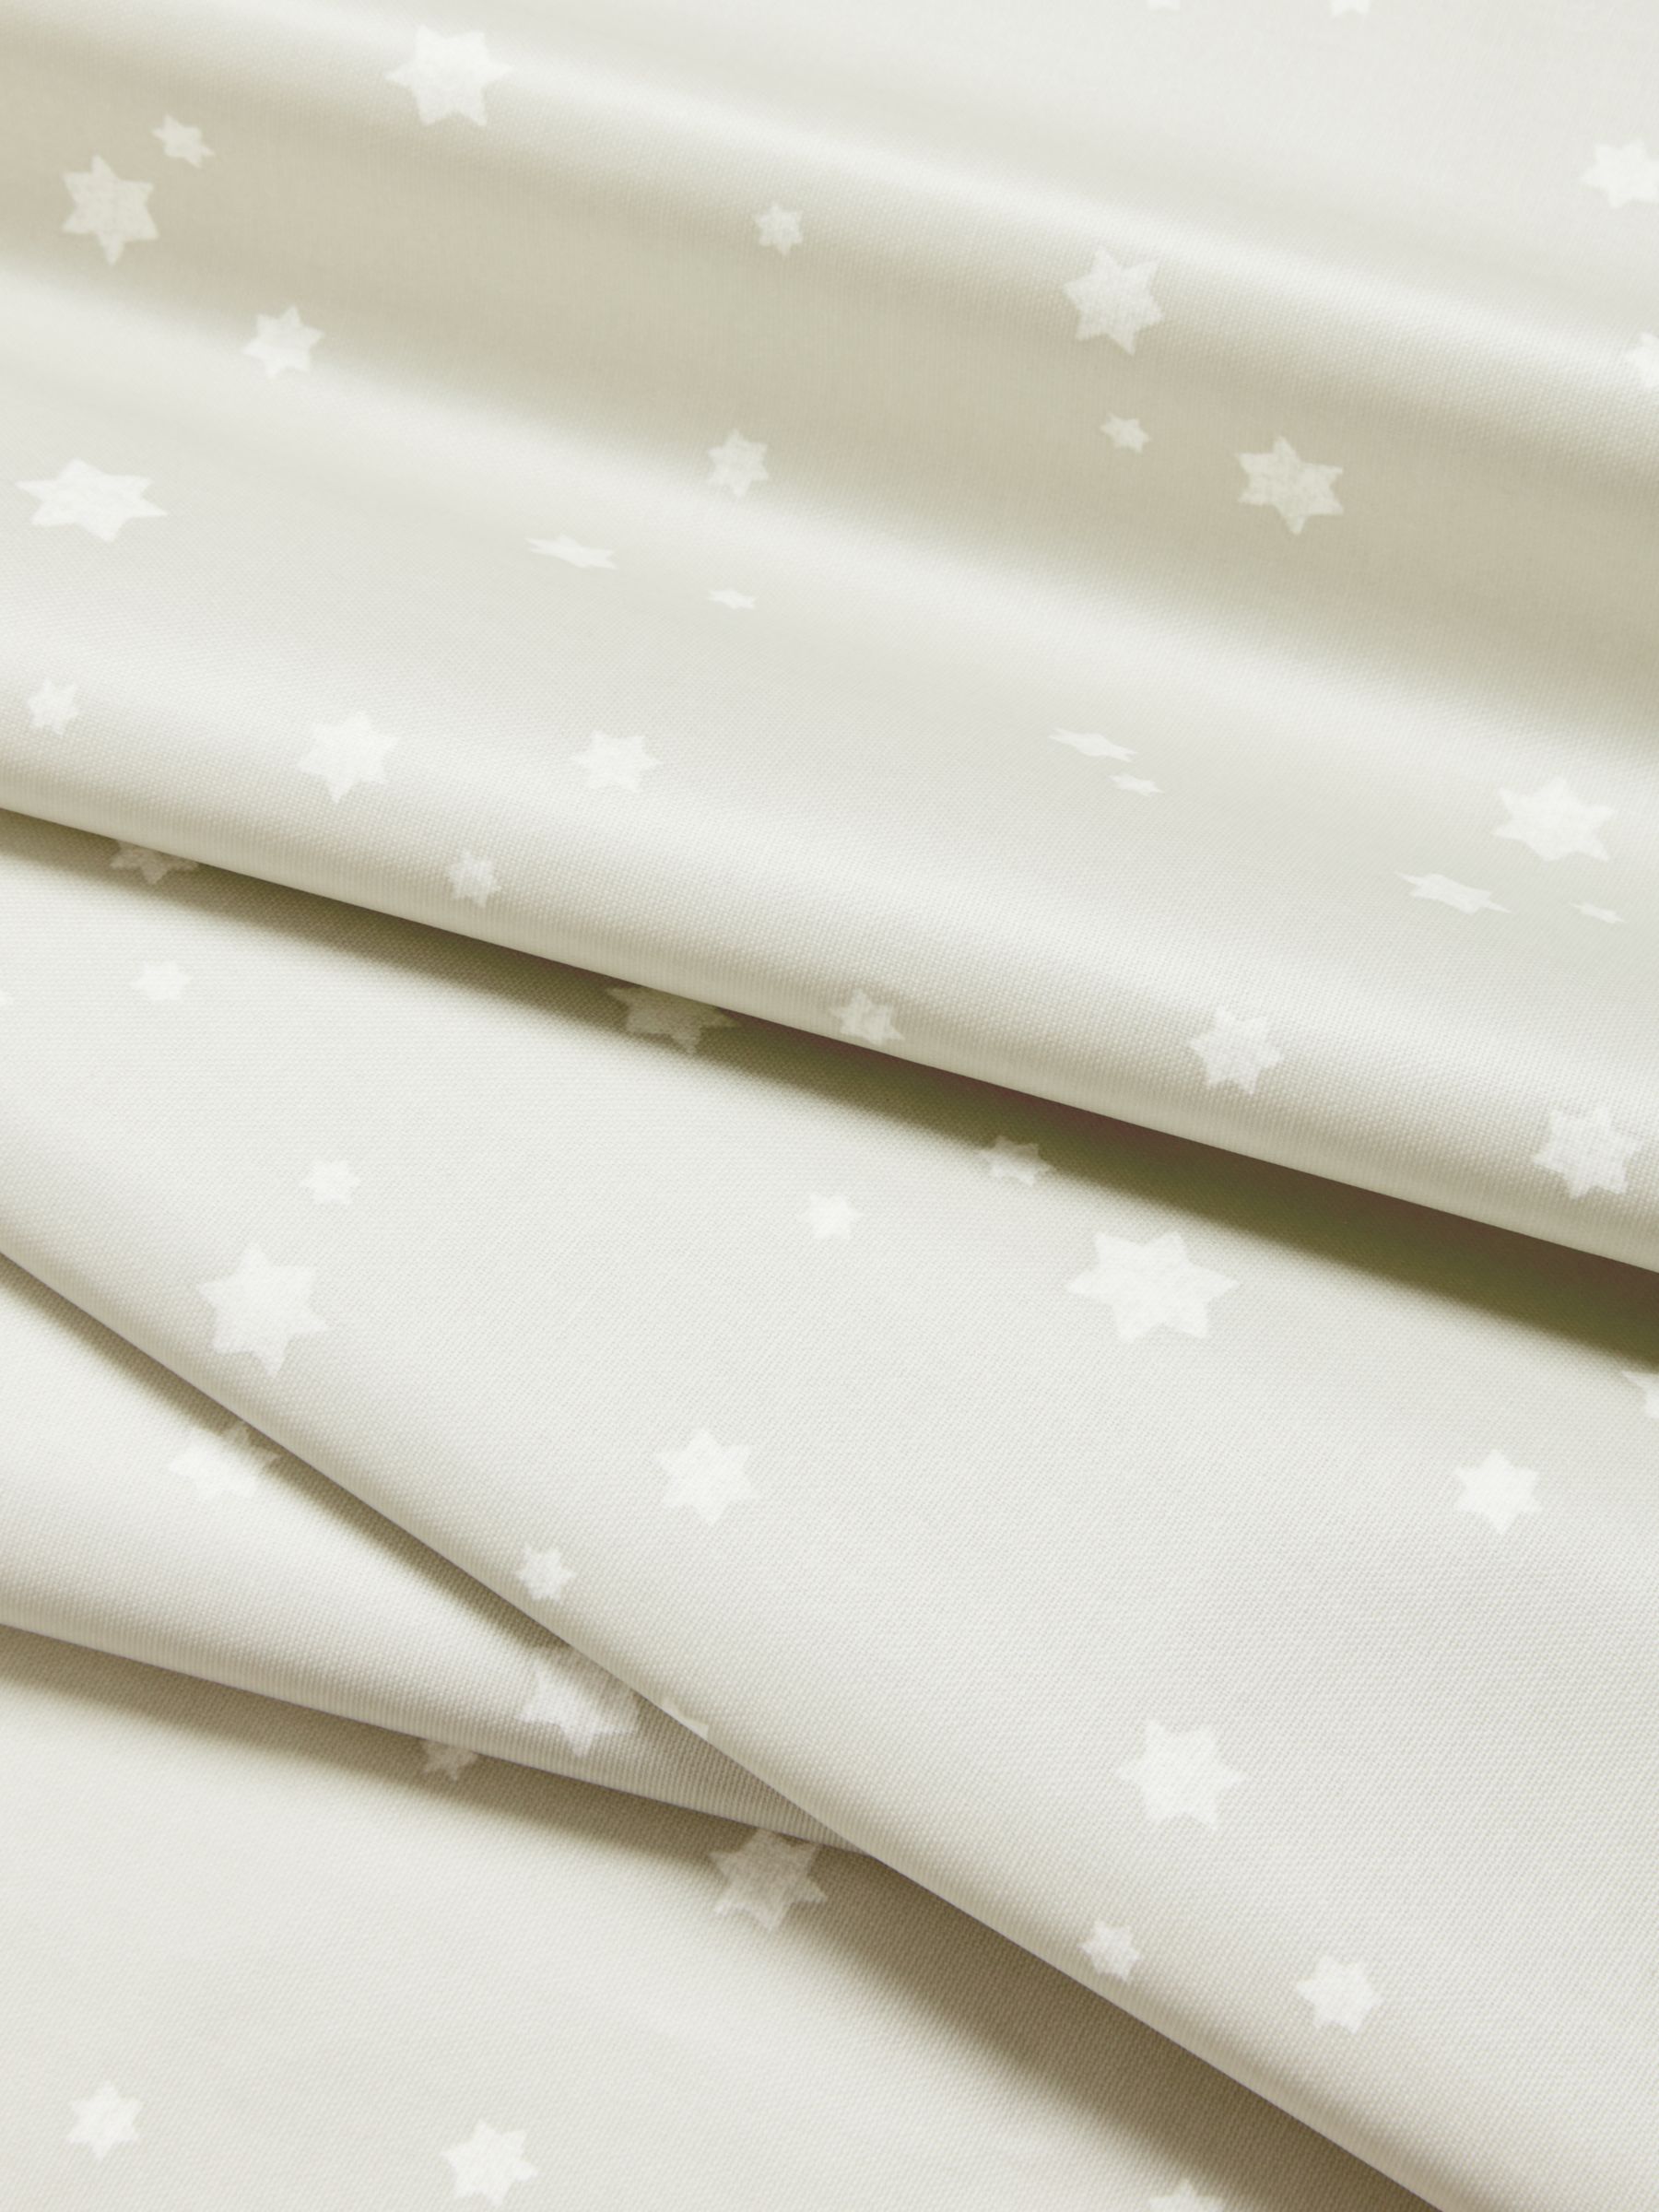 John Lewis & Partners Twinkle Twinkle PVC Tablecloth Fabric